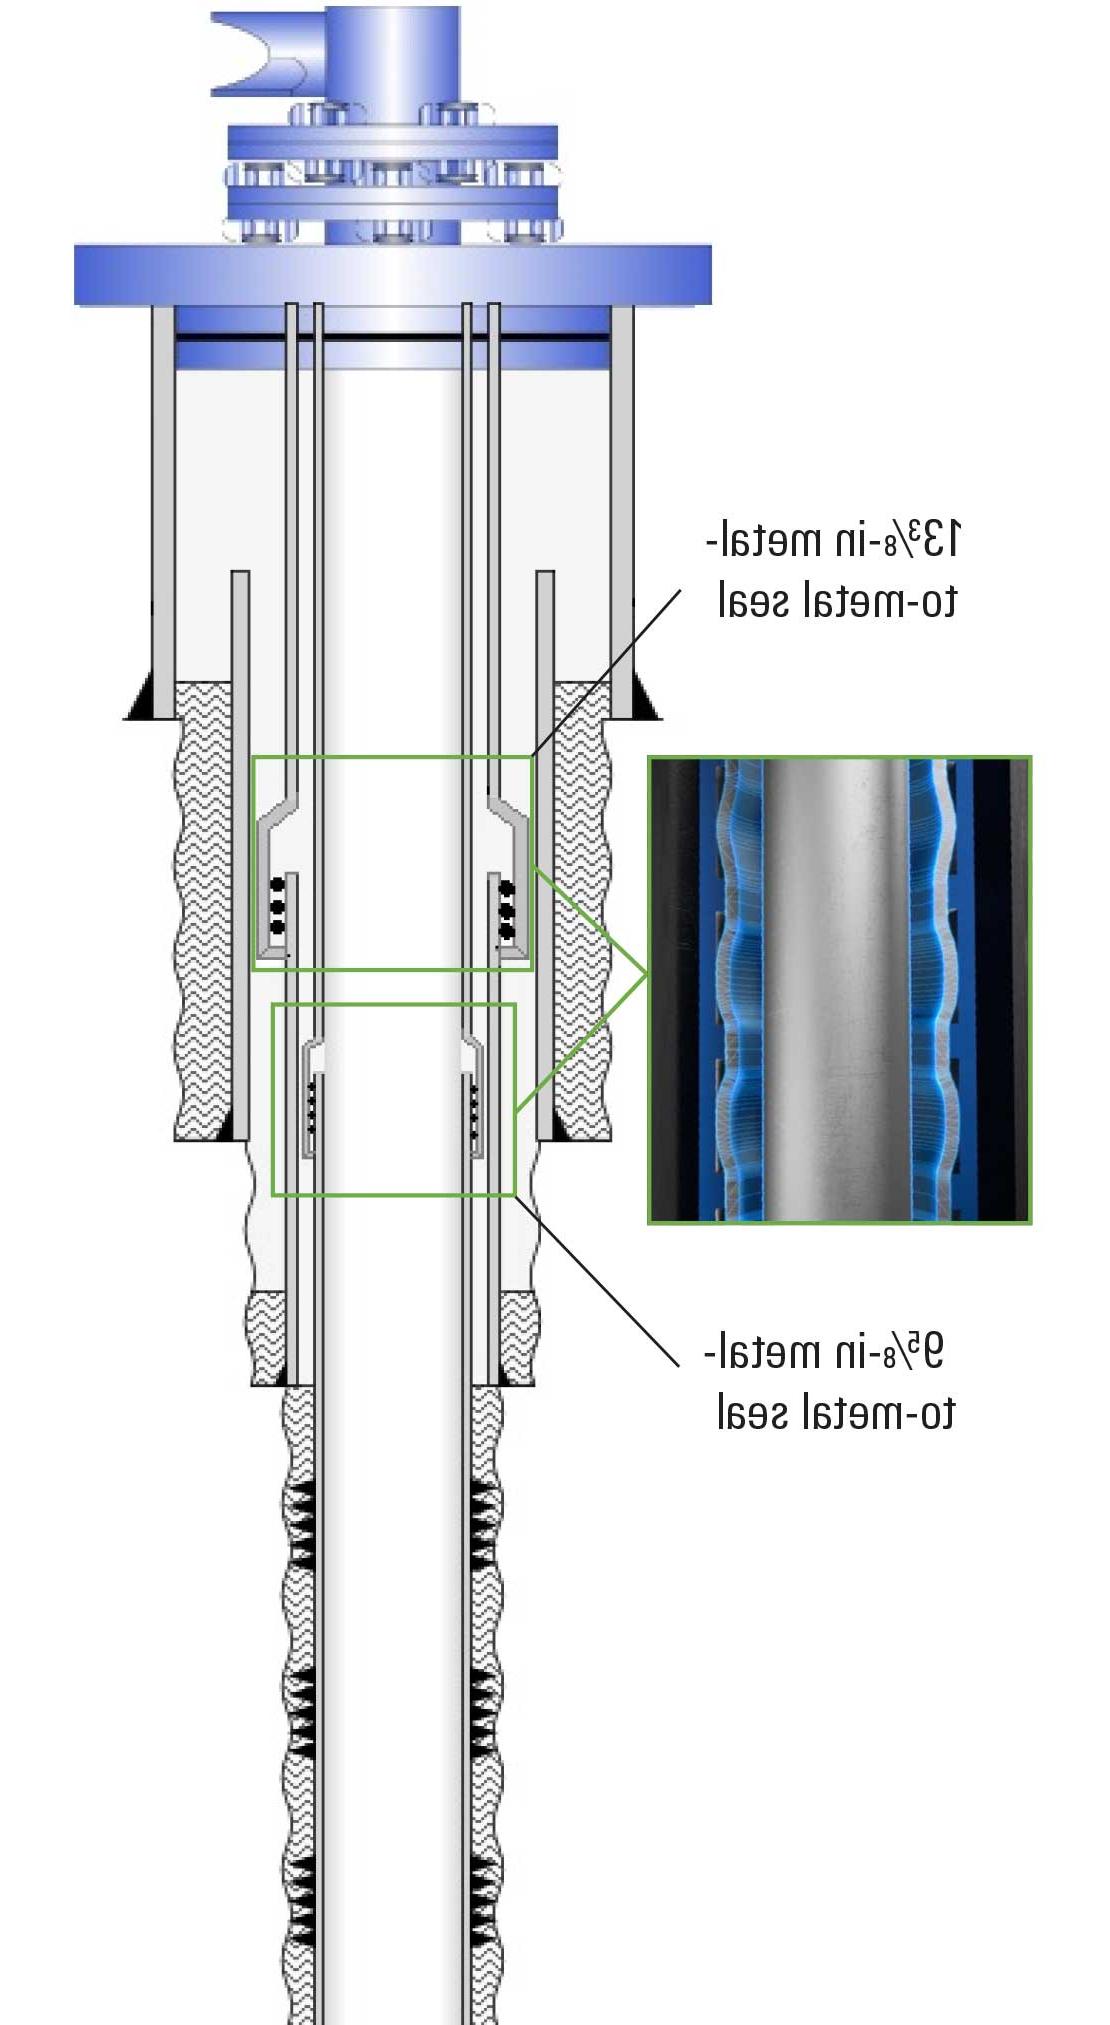 Well schematic shows 2 cut casing strings reconnected to surface with gas-tight seals for well reentry.